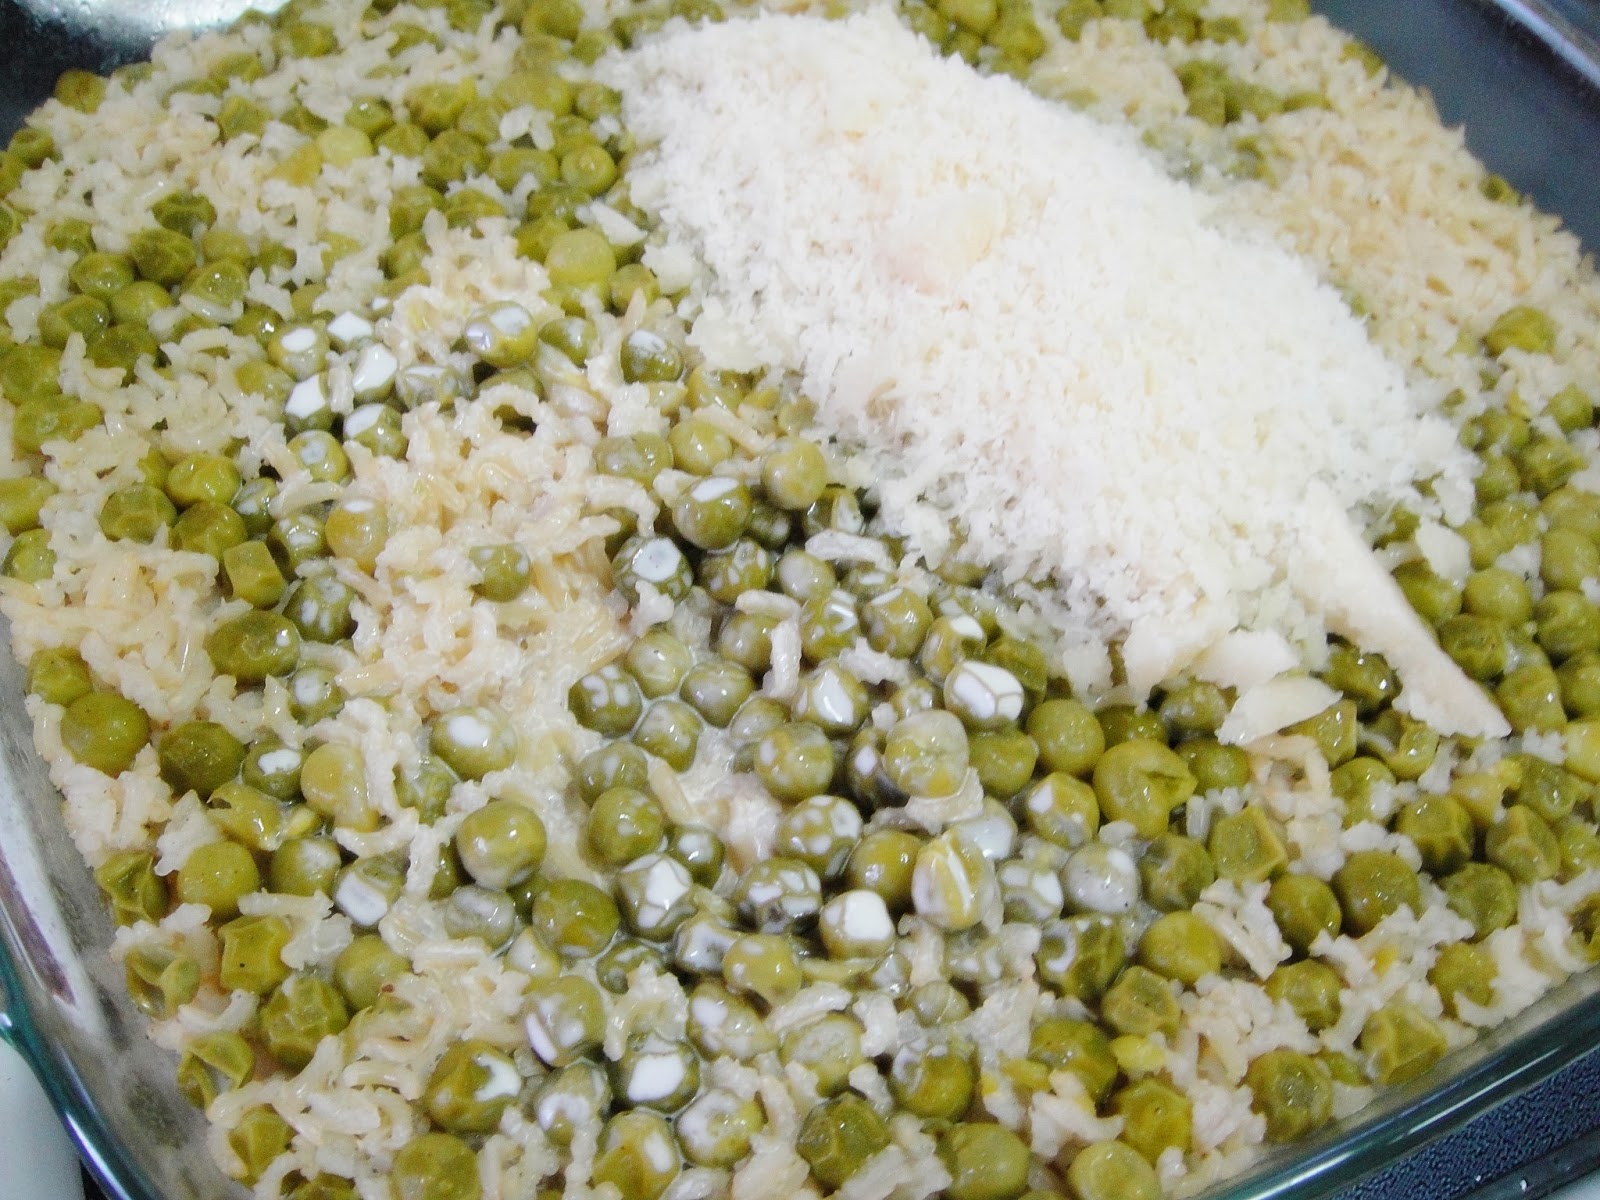 Maryam's Culinary Wonders: 587. Green Pea Brown Rice Risotto (Baked)